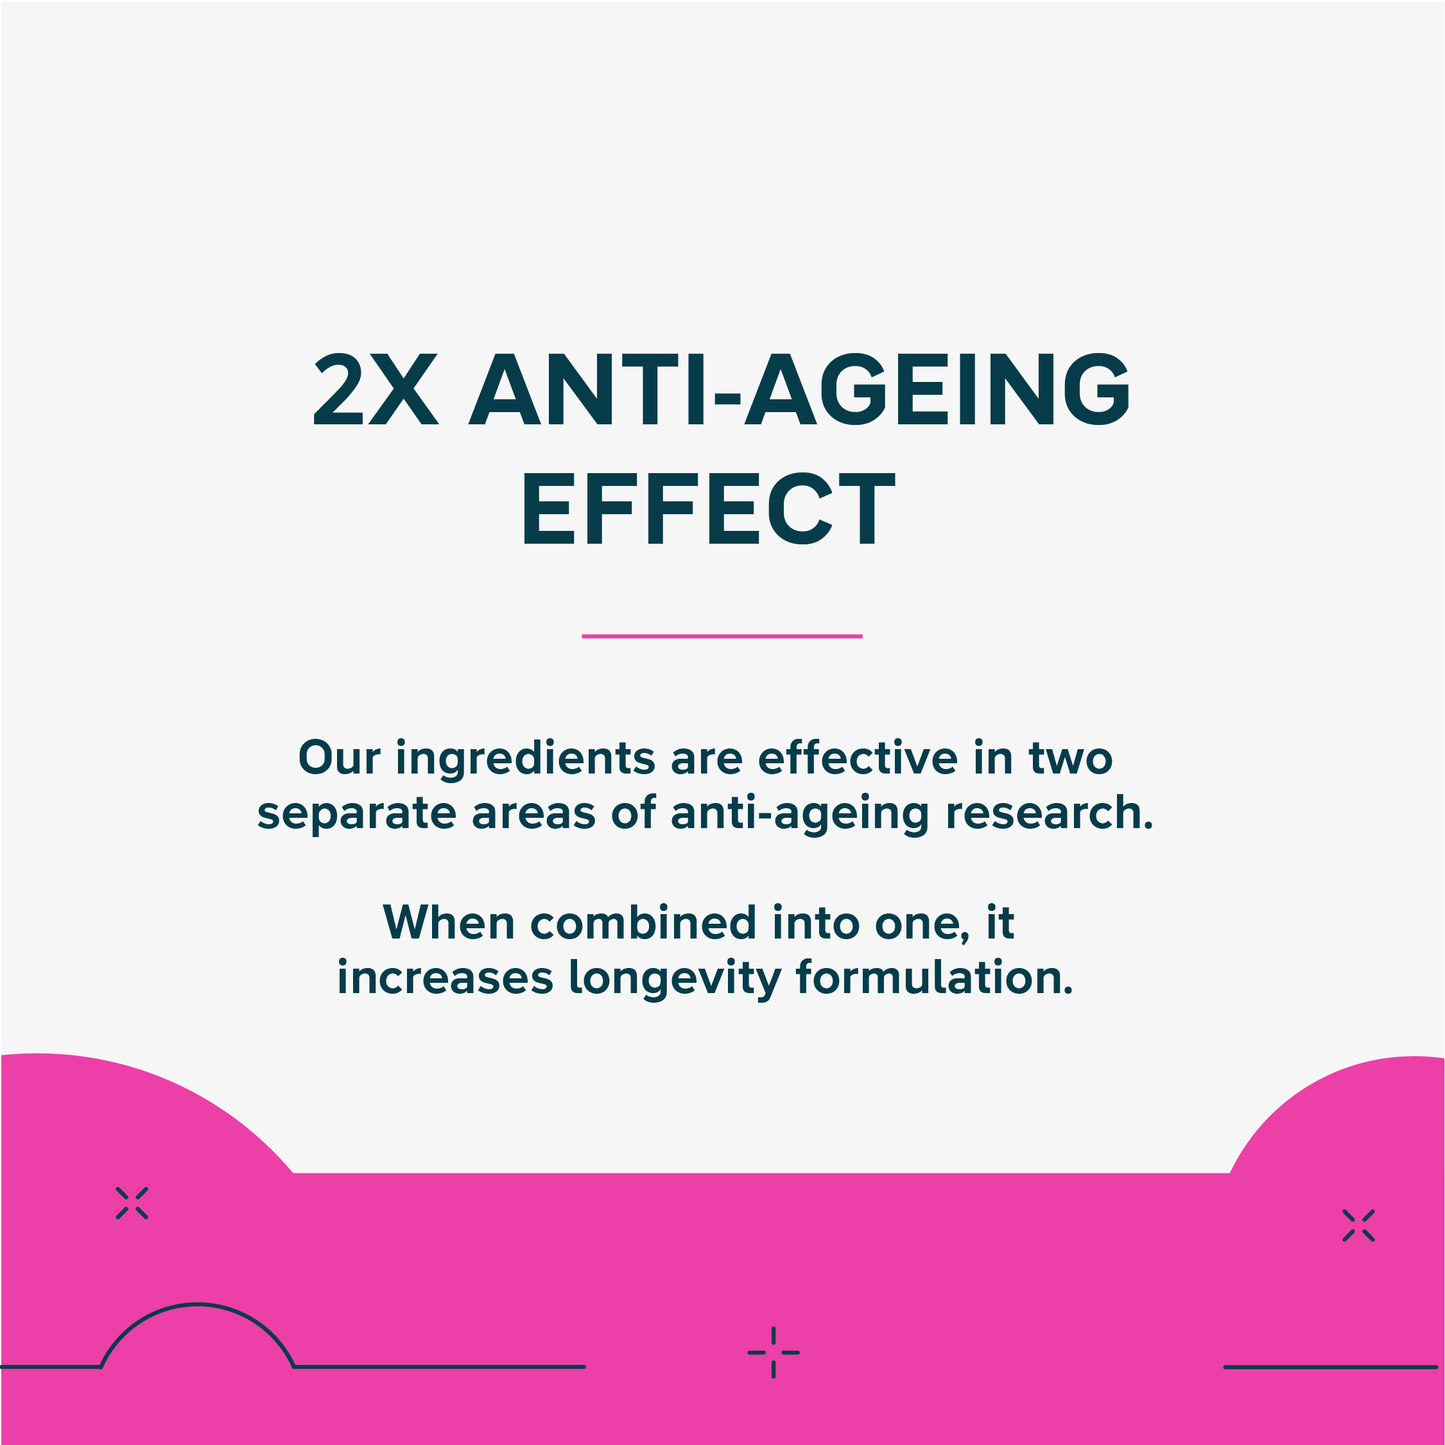 AGE RENU - Dual action Anti-aging and longevity supplement